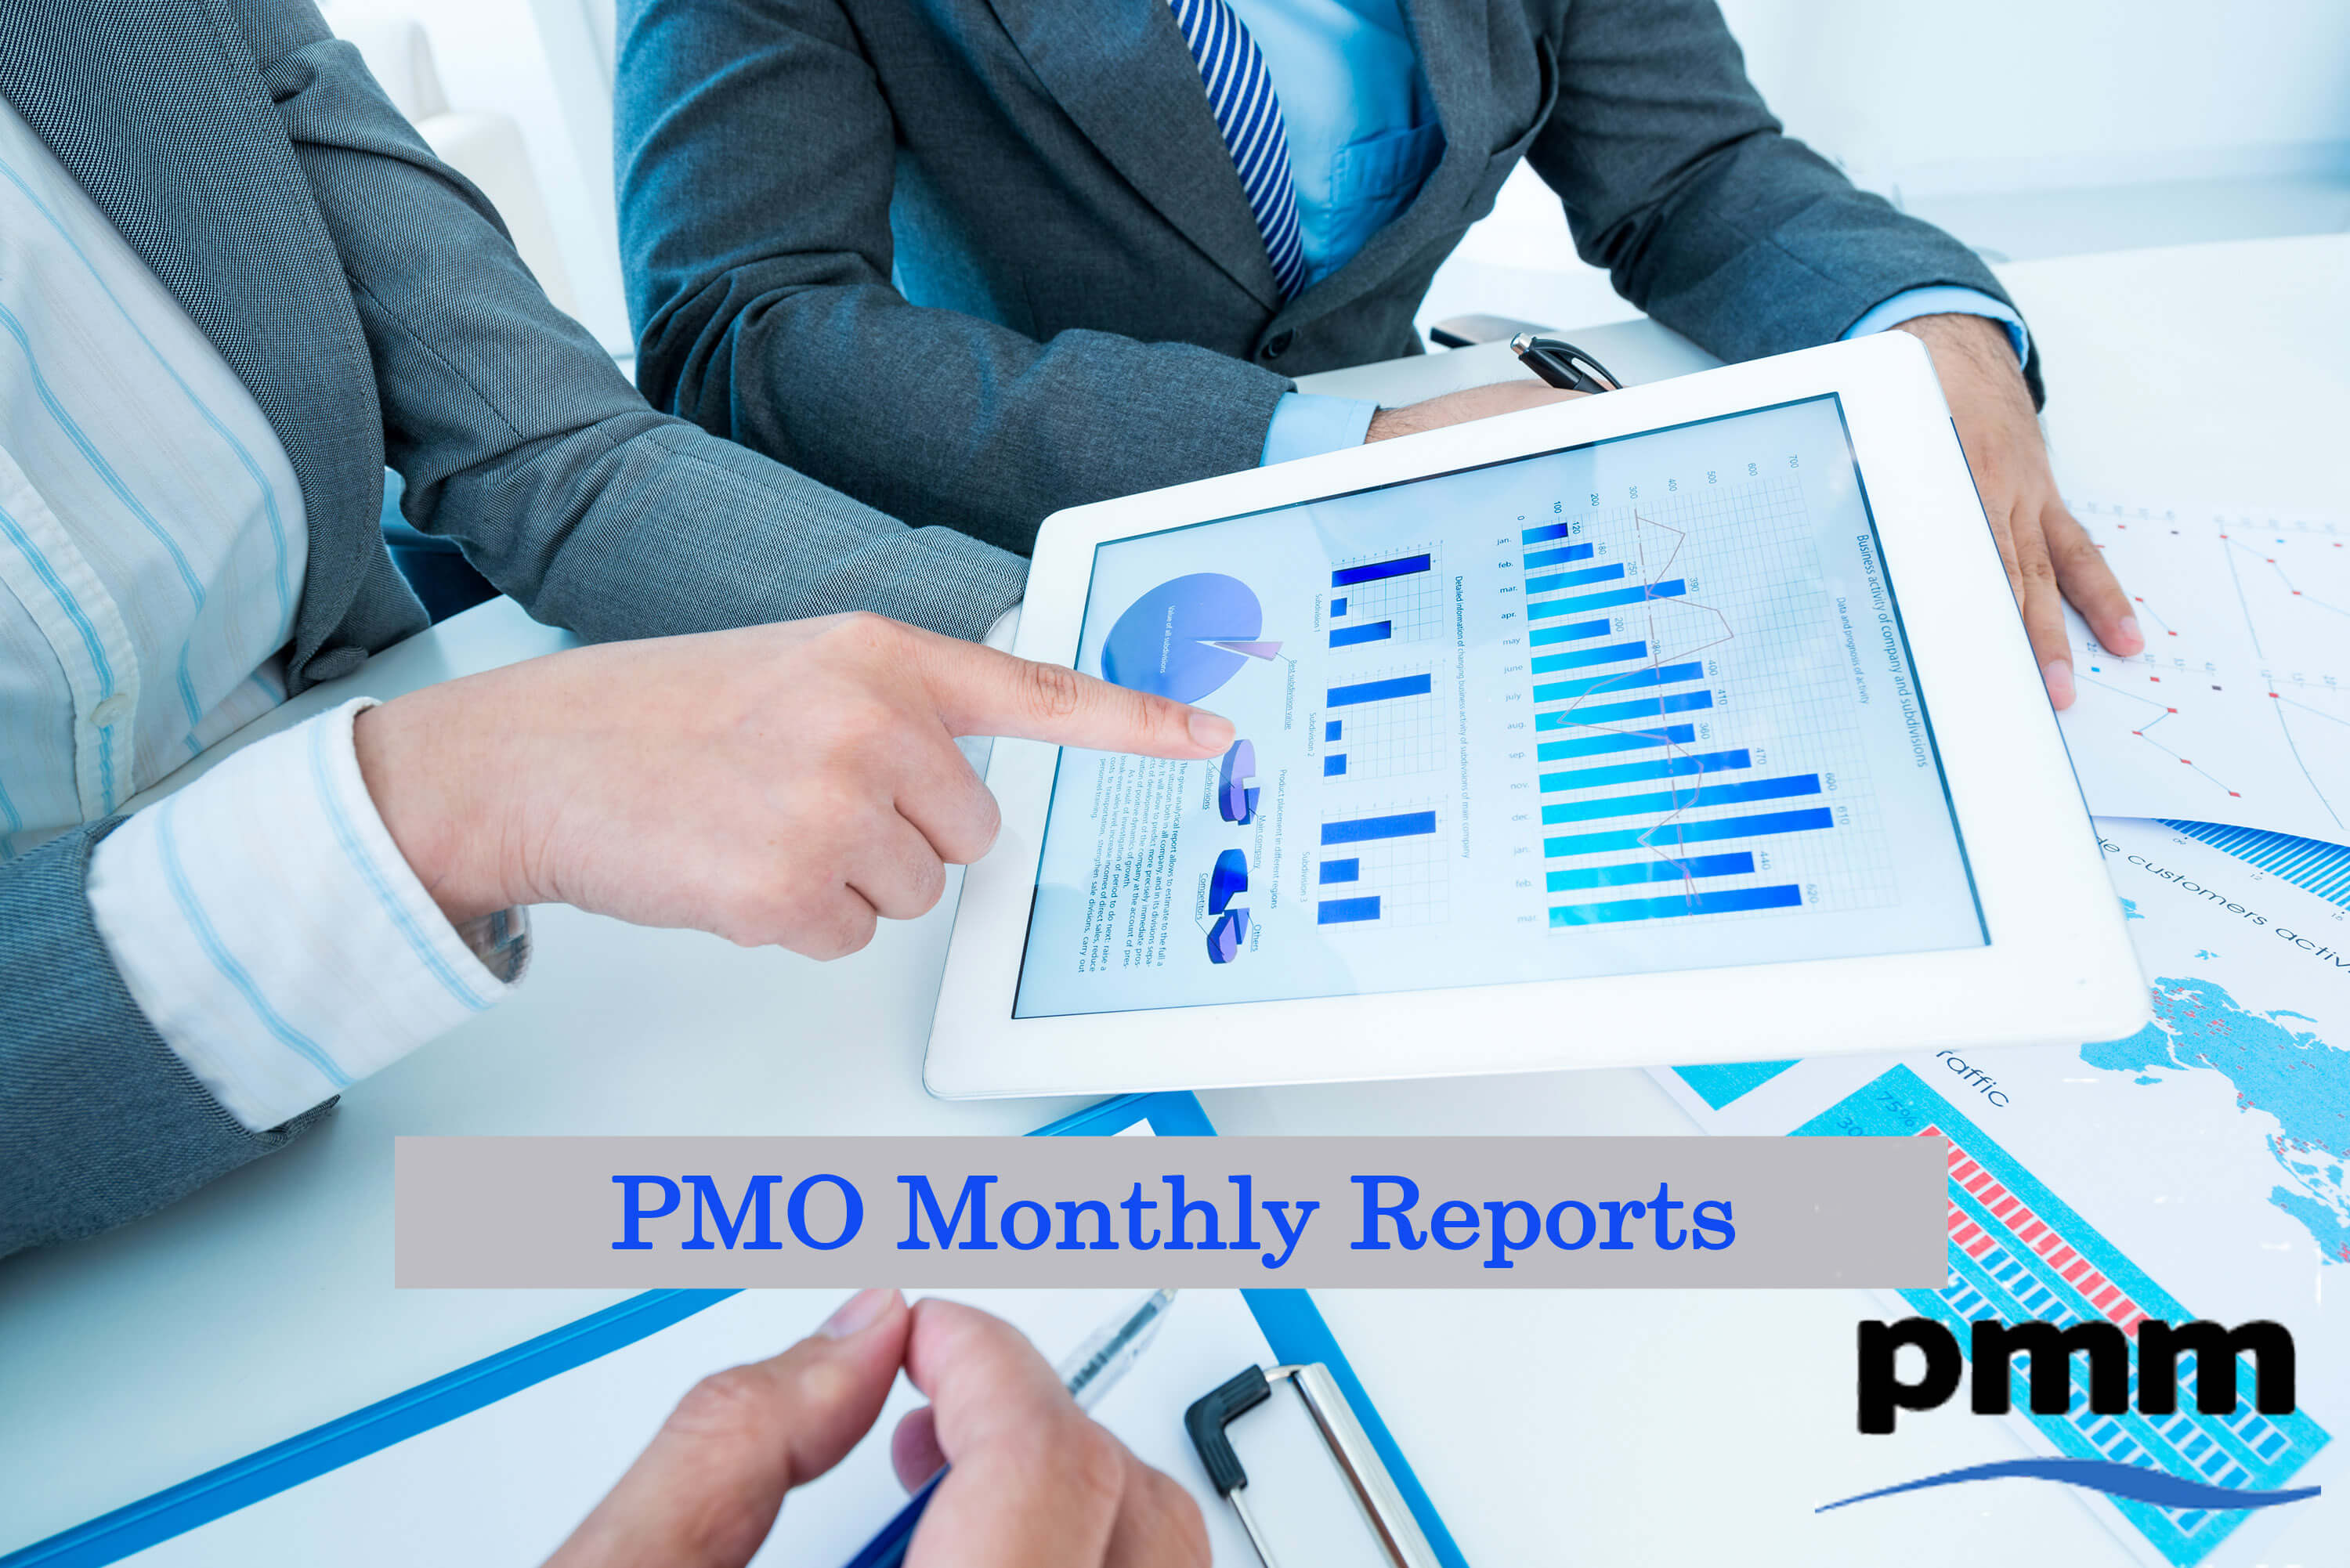 Reviewing PMO monthly report